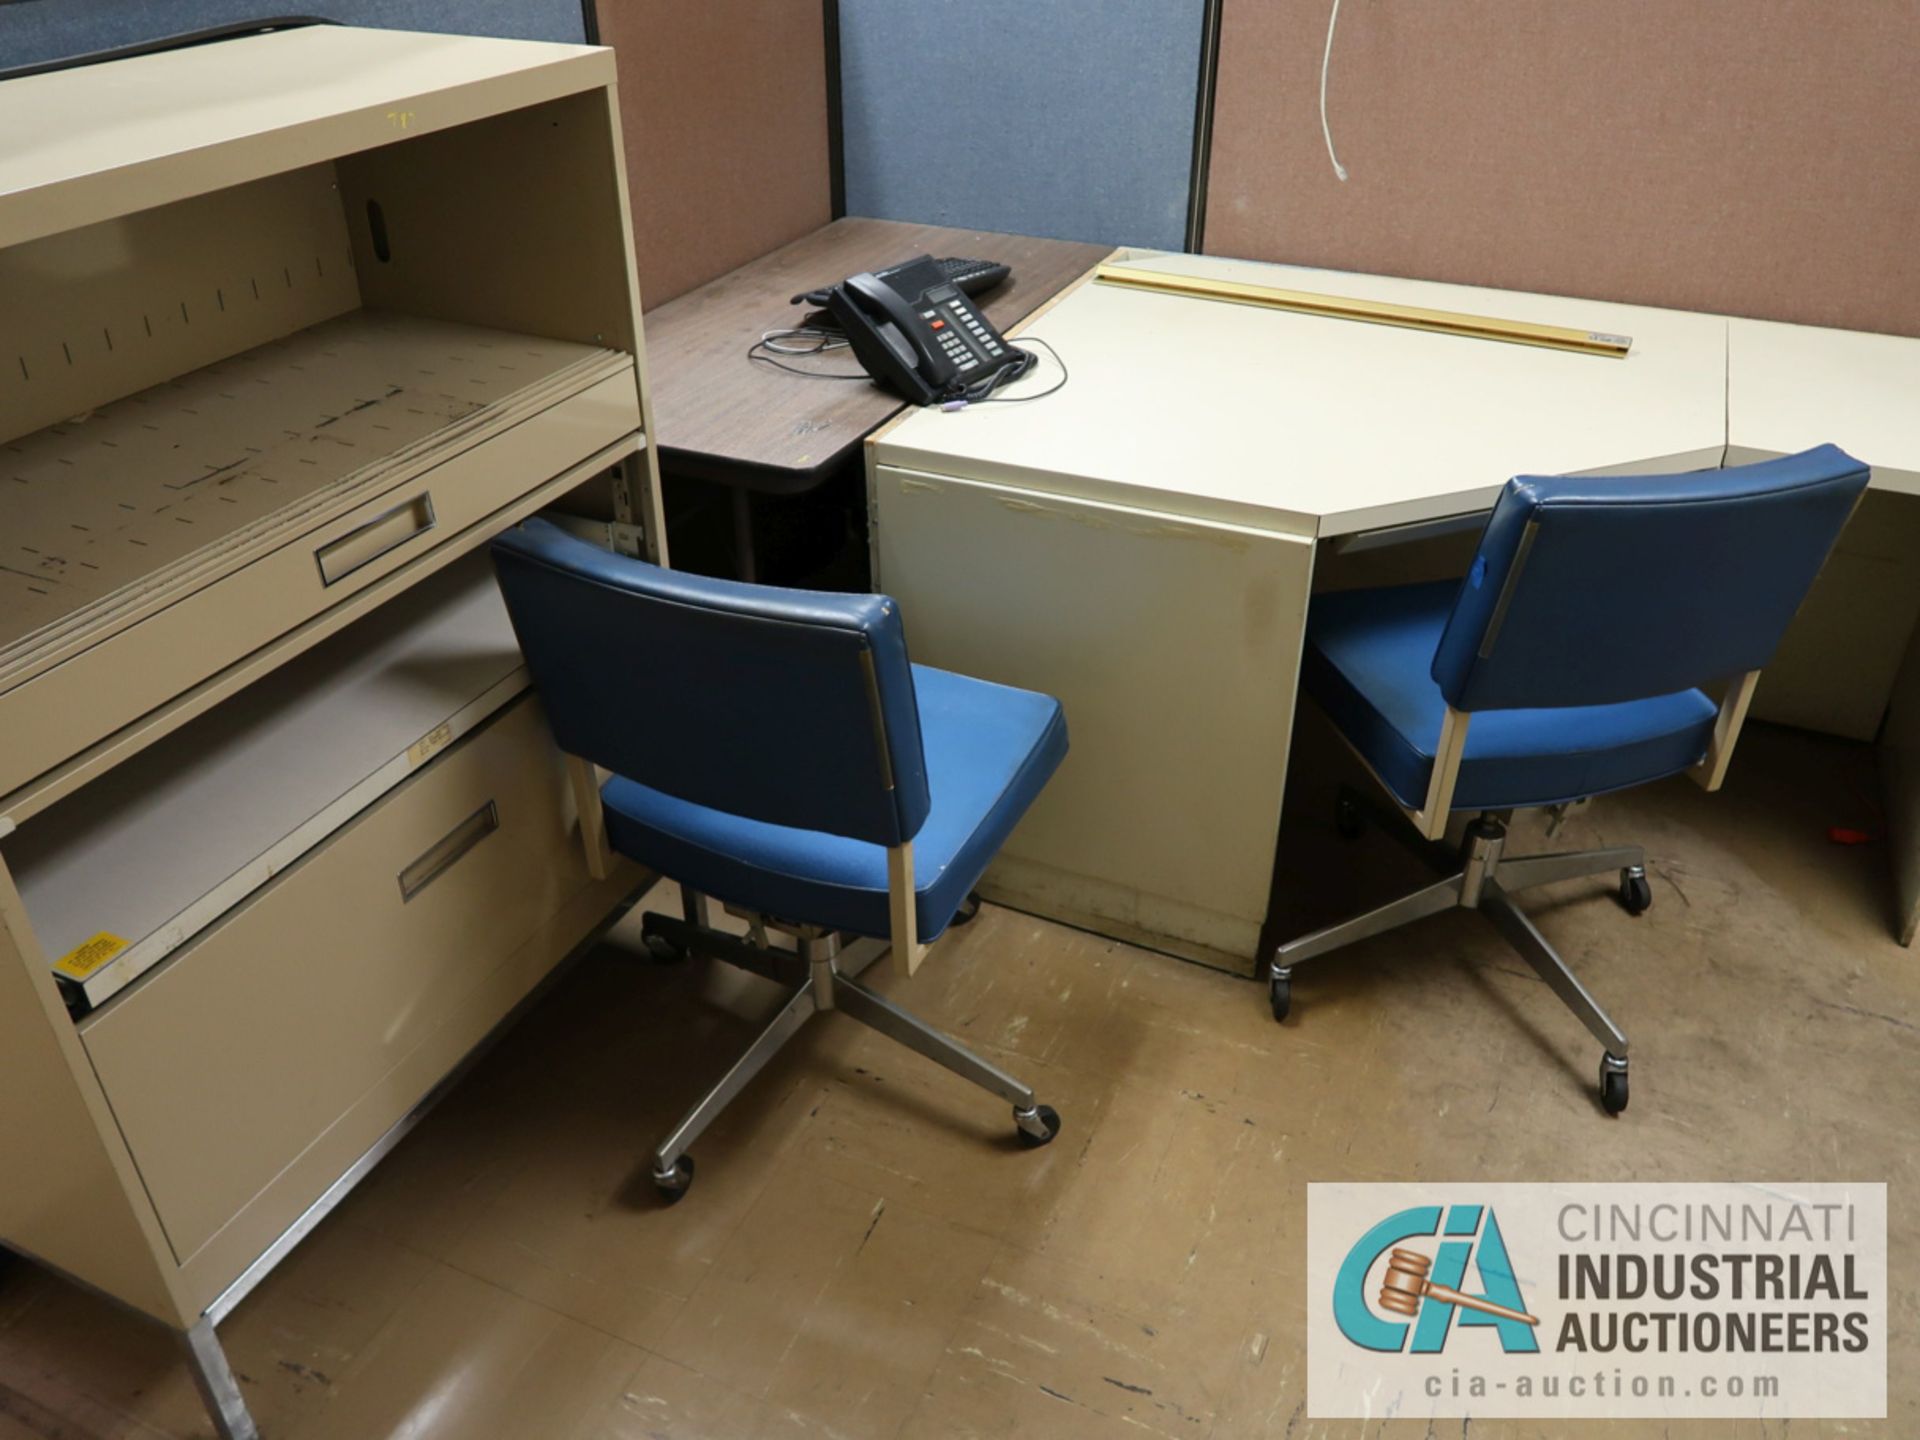 (LOT) FURNITURE IN CUBICLE INCLUDING (2) DESKS, (2) CABINETS, TABLE